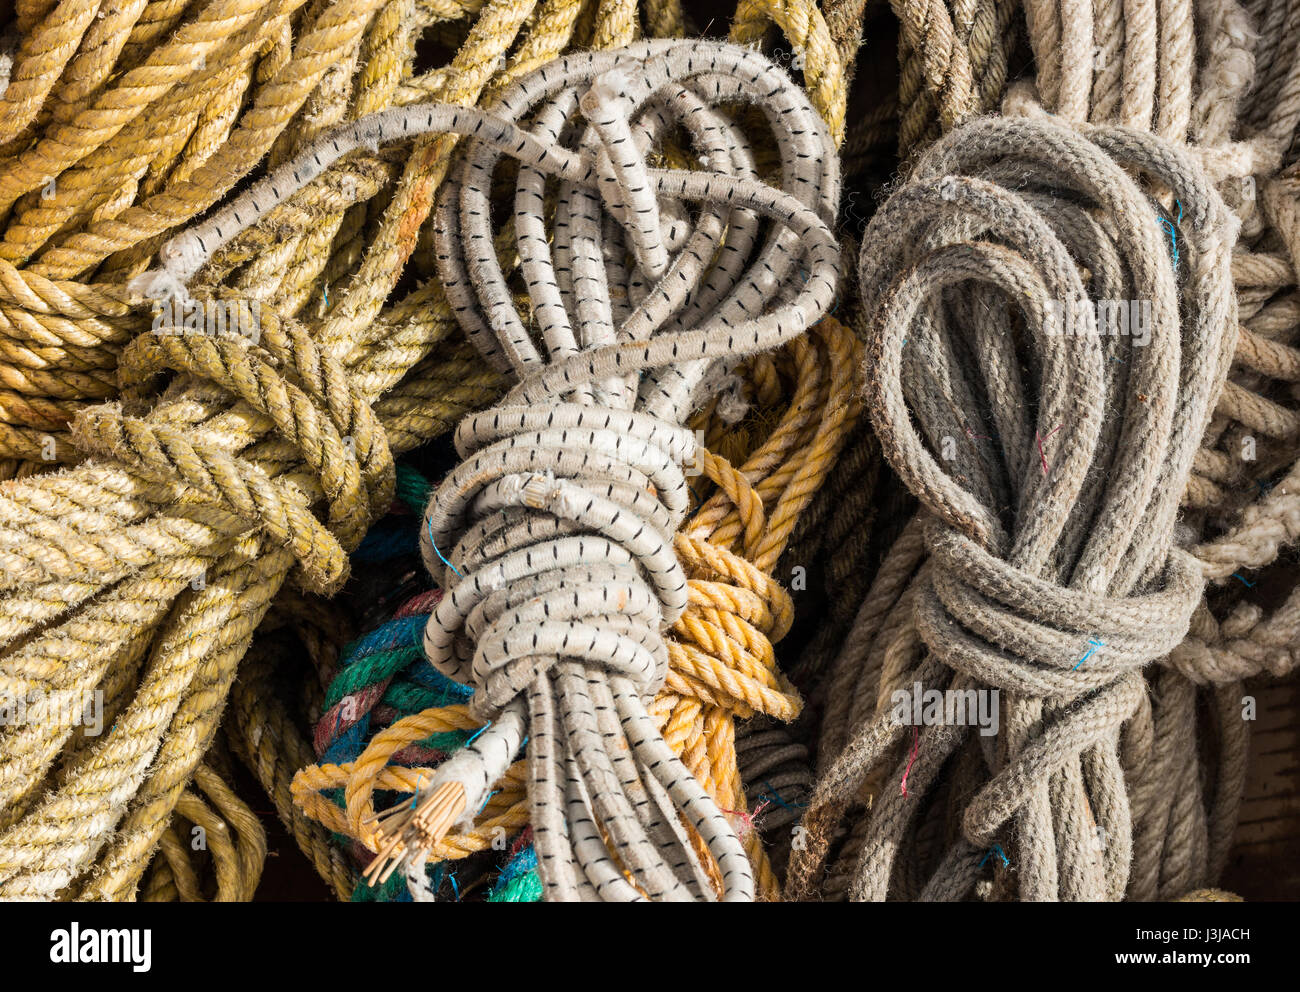 Collection of ropes the haves been tidy up. Stock Photo